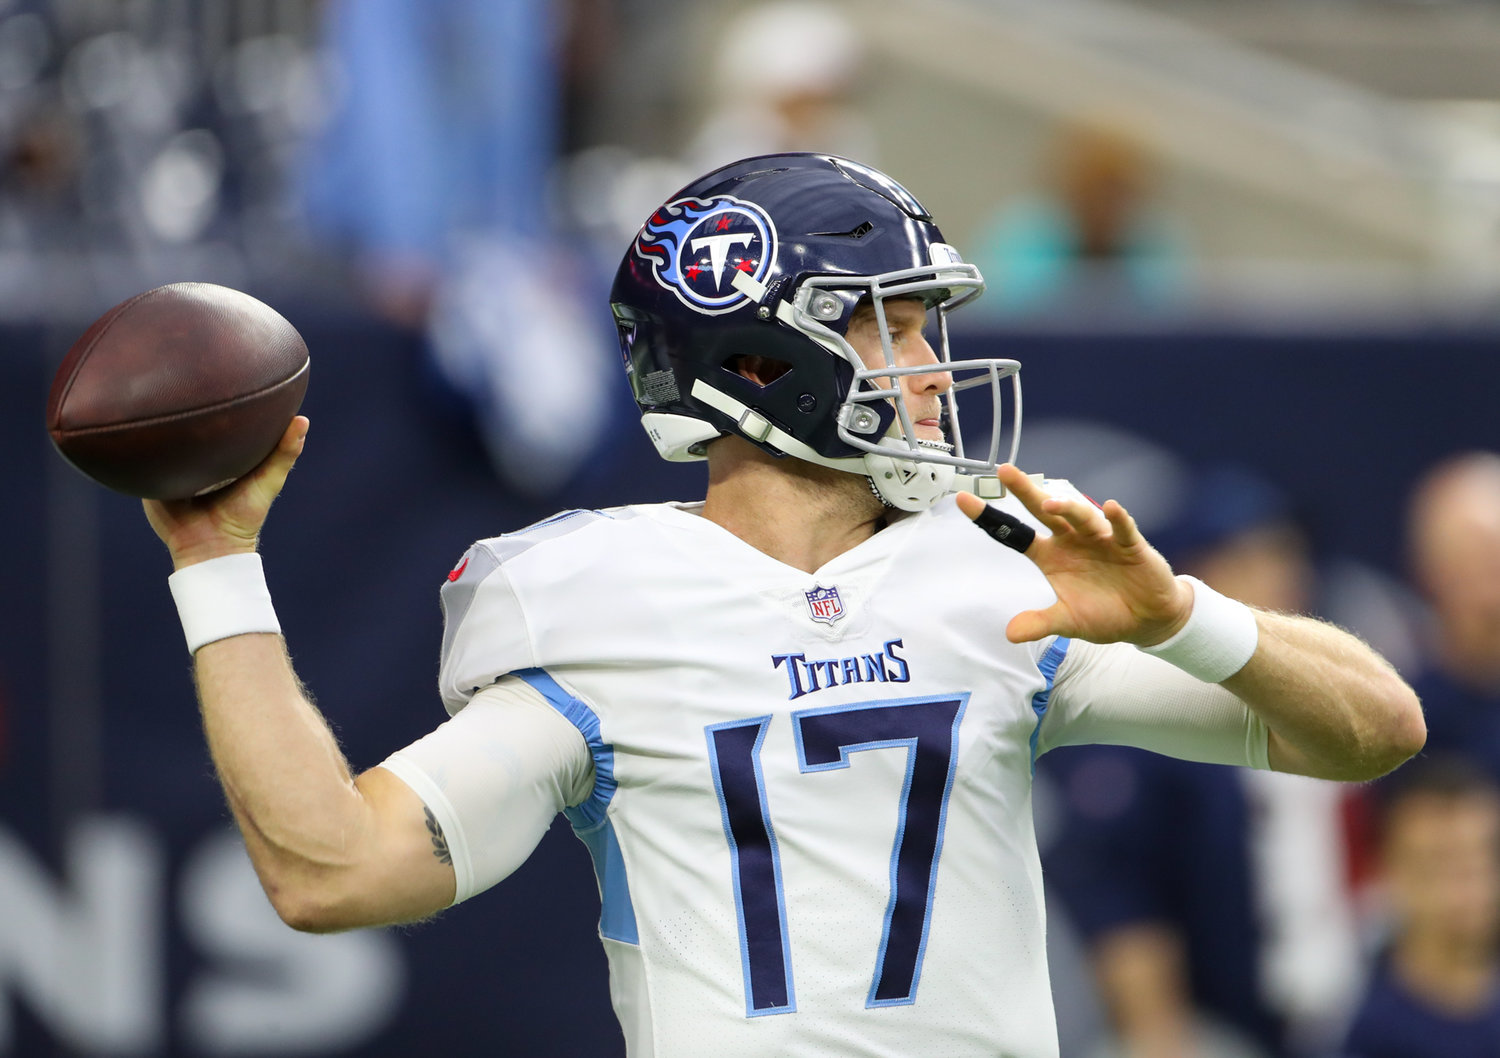 Tennessee Titans quarterback Ryan Tannehill (17) warms up before the start of an NFL game between the Texans and the Titans on Jan. 9, 2022 in Houston, Texas.